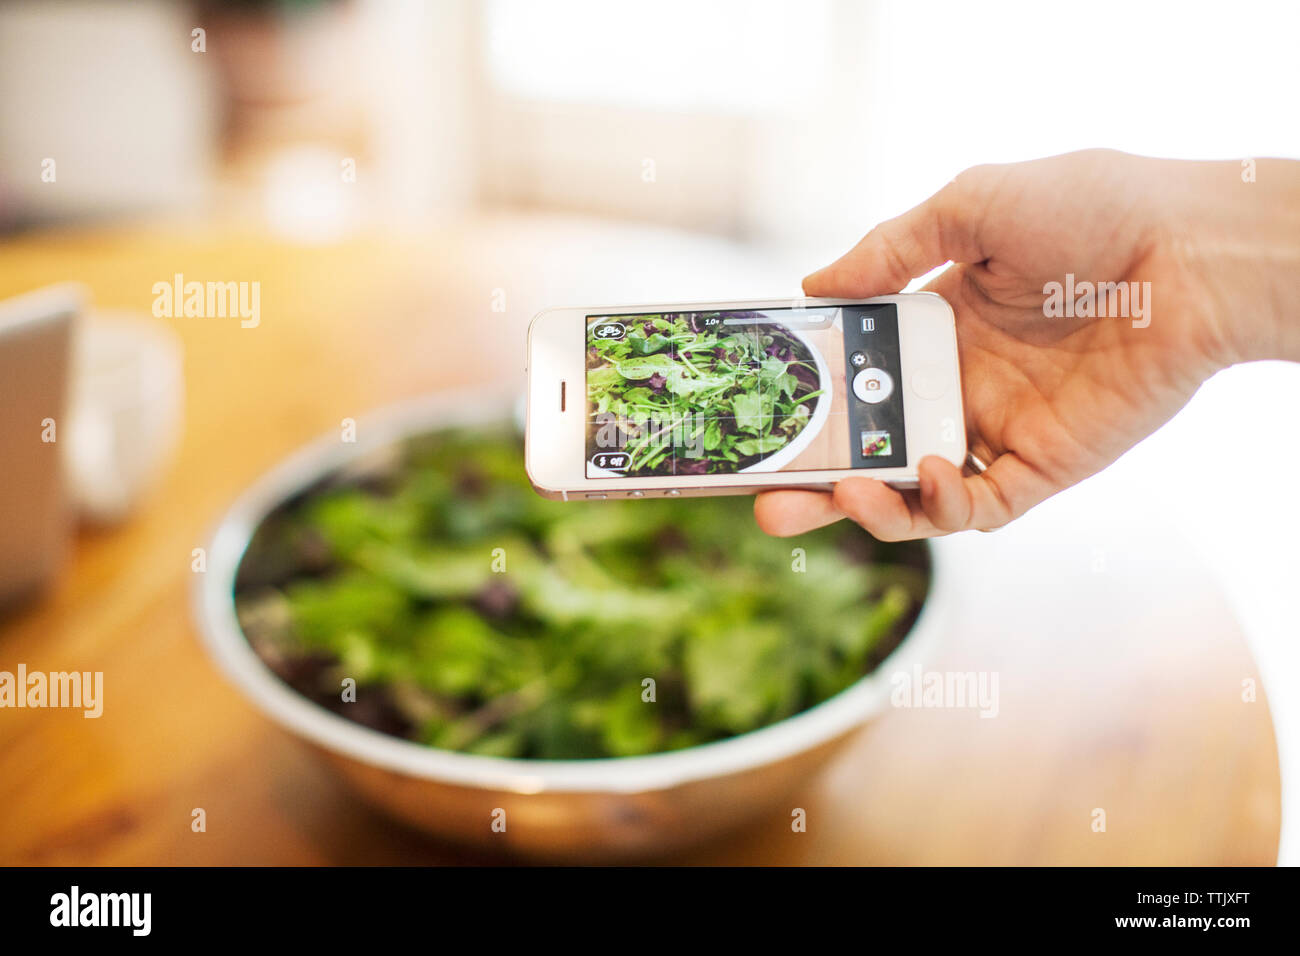 Cropped image of hand photographing leaf vegetable in bowl on table Stock Photo